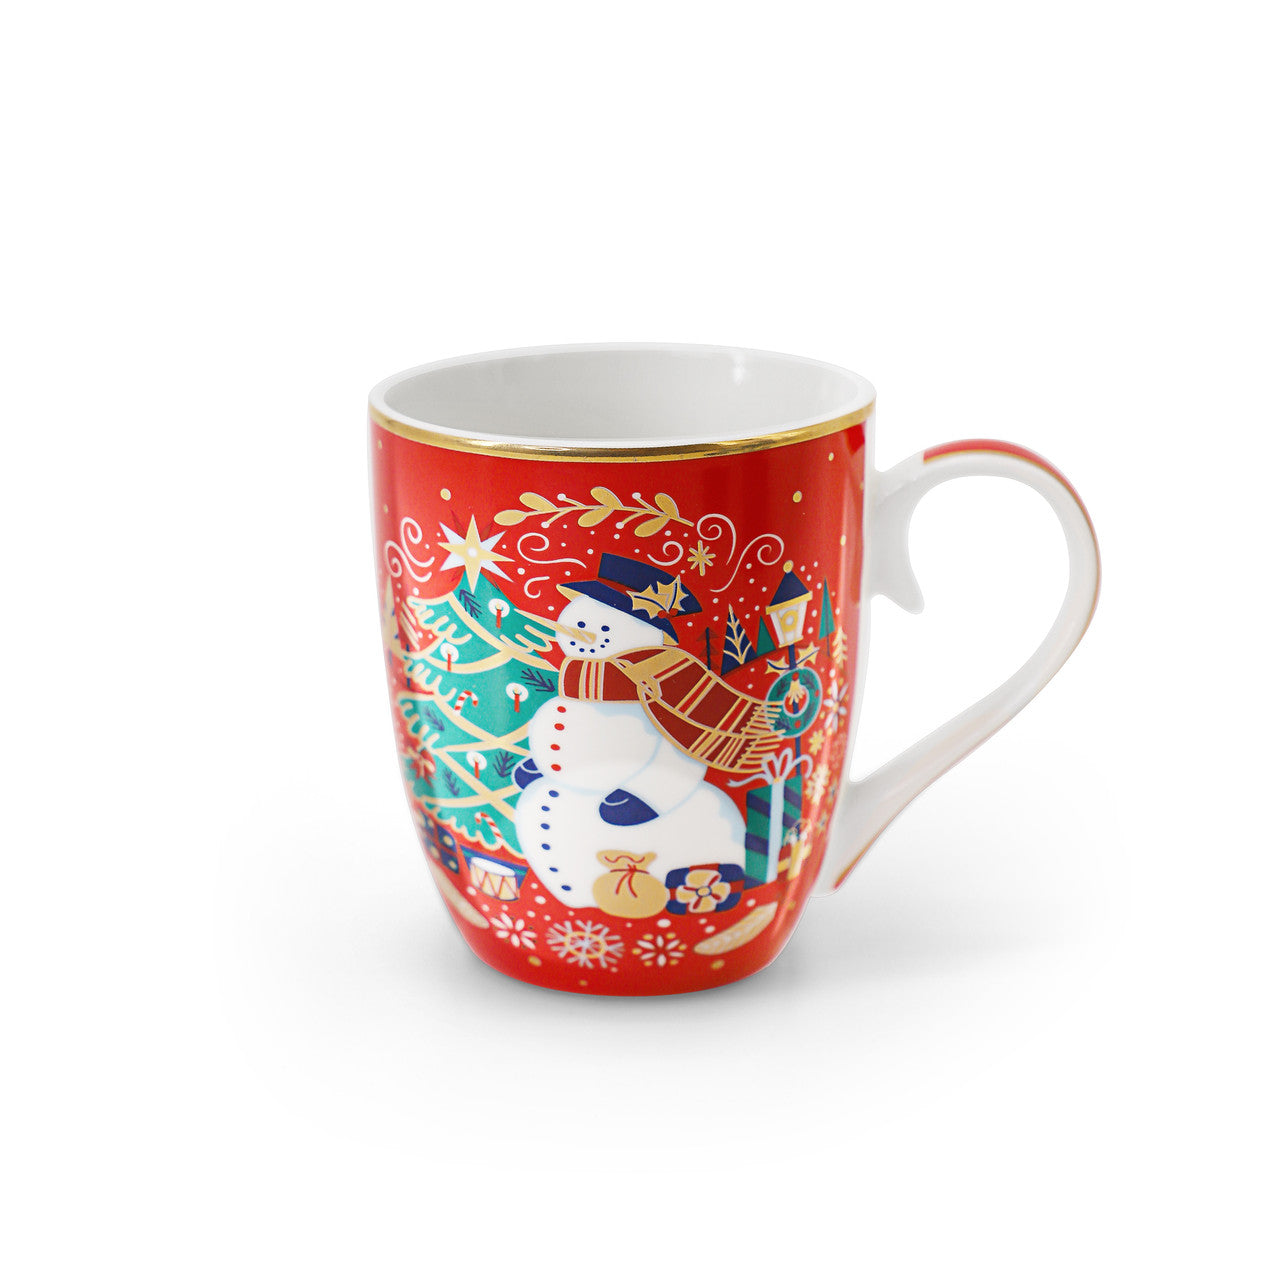 Tipperary Crystal Single Christmas Mug - Snowman - NEW 2022  Gather your loved ones for a holiday celebration to remember. Our Christmas Tableware is made to bring festive happiness to lunch, dinner and every meal in between. Tipperary wishes to make these moments even more magical.